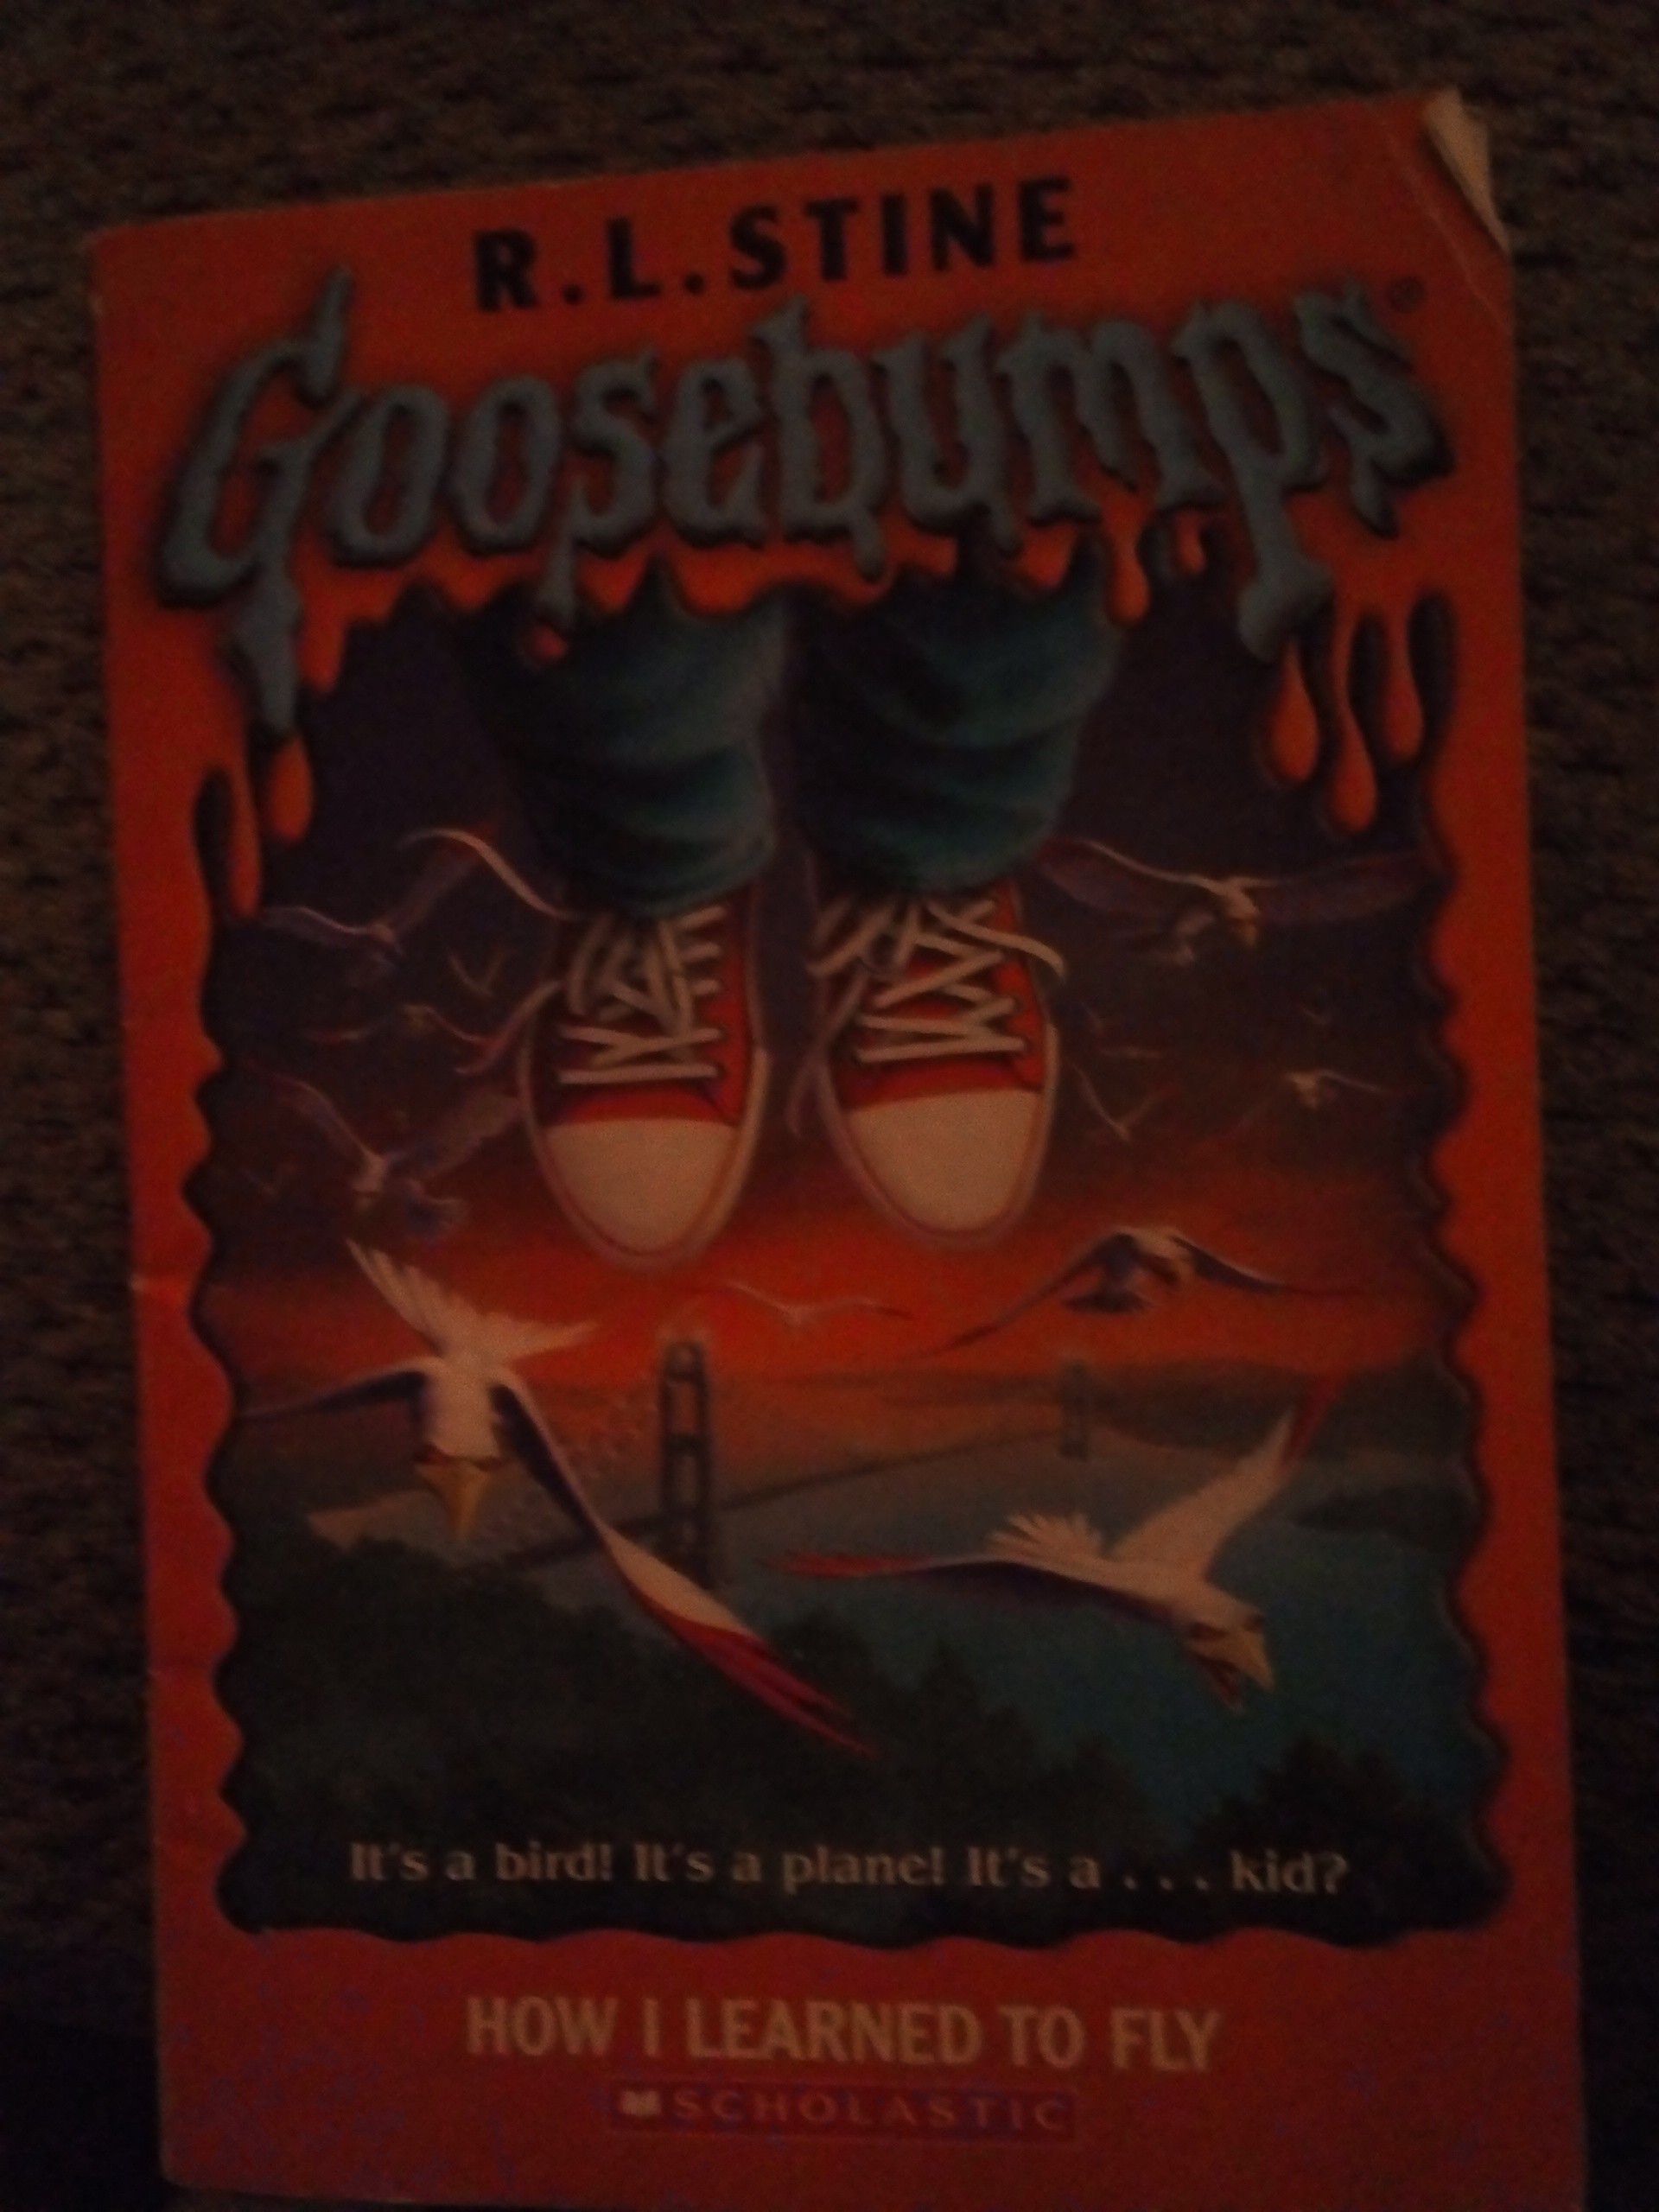 Books, Goosebumps, Beast from the East,How I Learned to Fly,Go Eat Worms,The Ghost Next Door